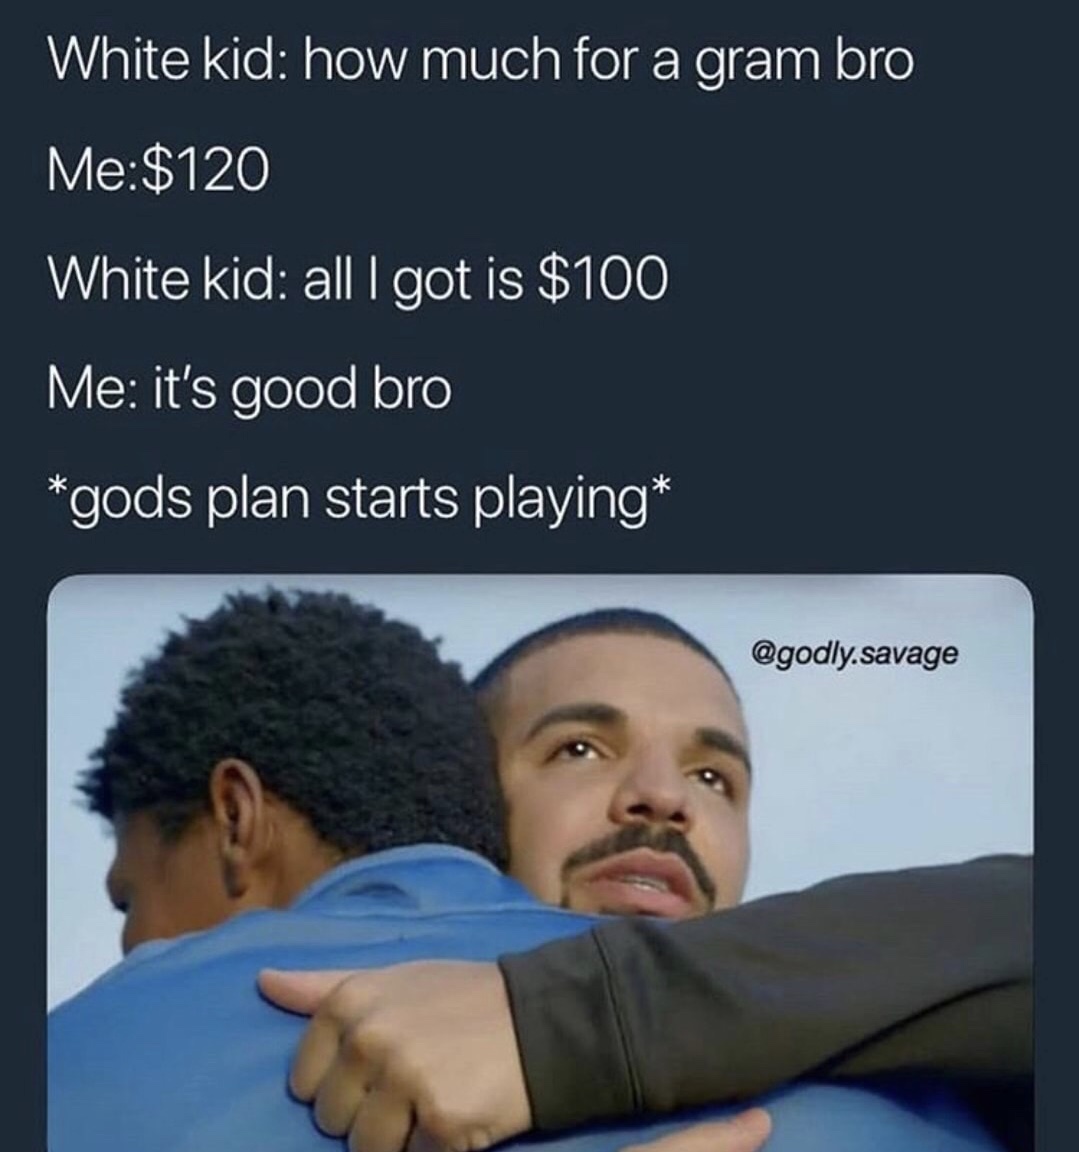 dank meme heat hot weather meme - White kid how much for a gram bro Me$120 White kid all I got is $100 Me it's good bro gods plan starts playing .savage